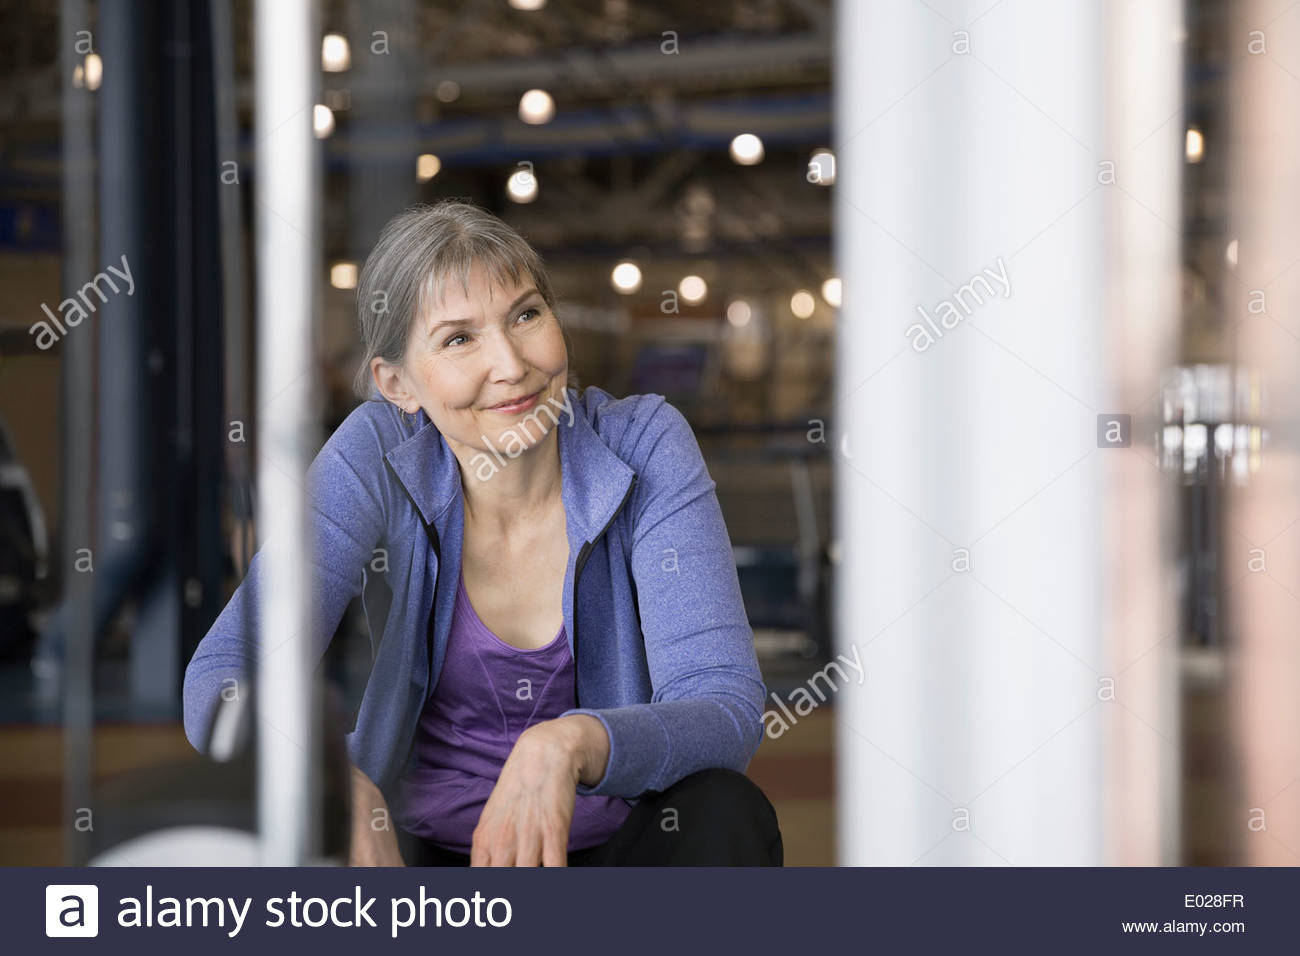 Smiling woman at gym Stock Photo